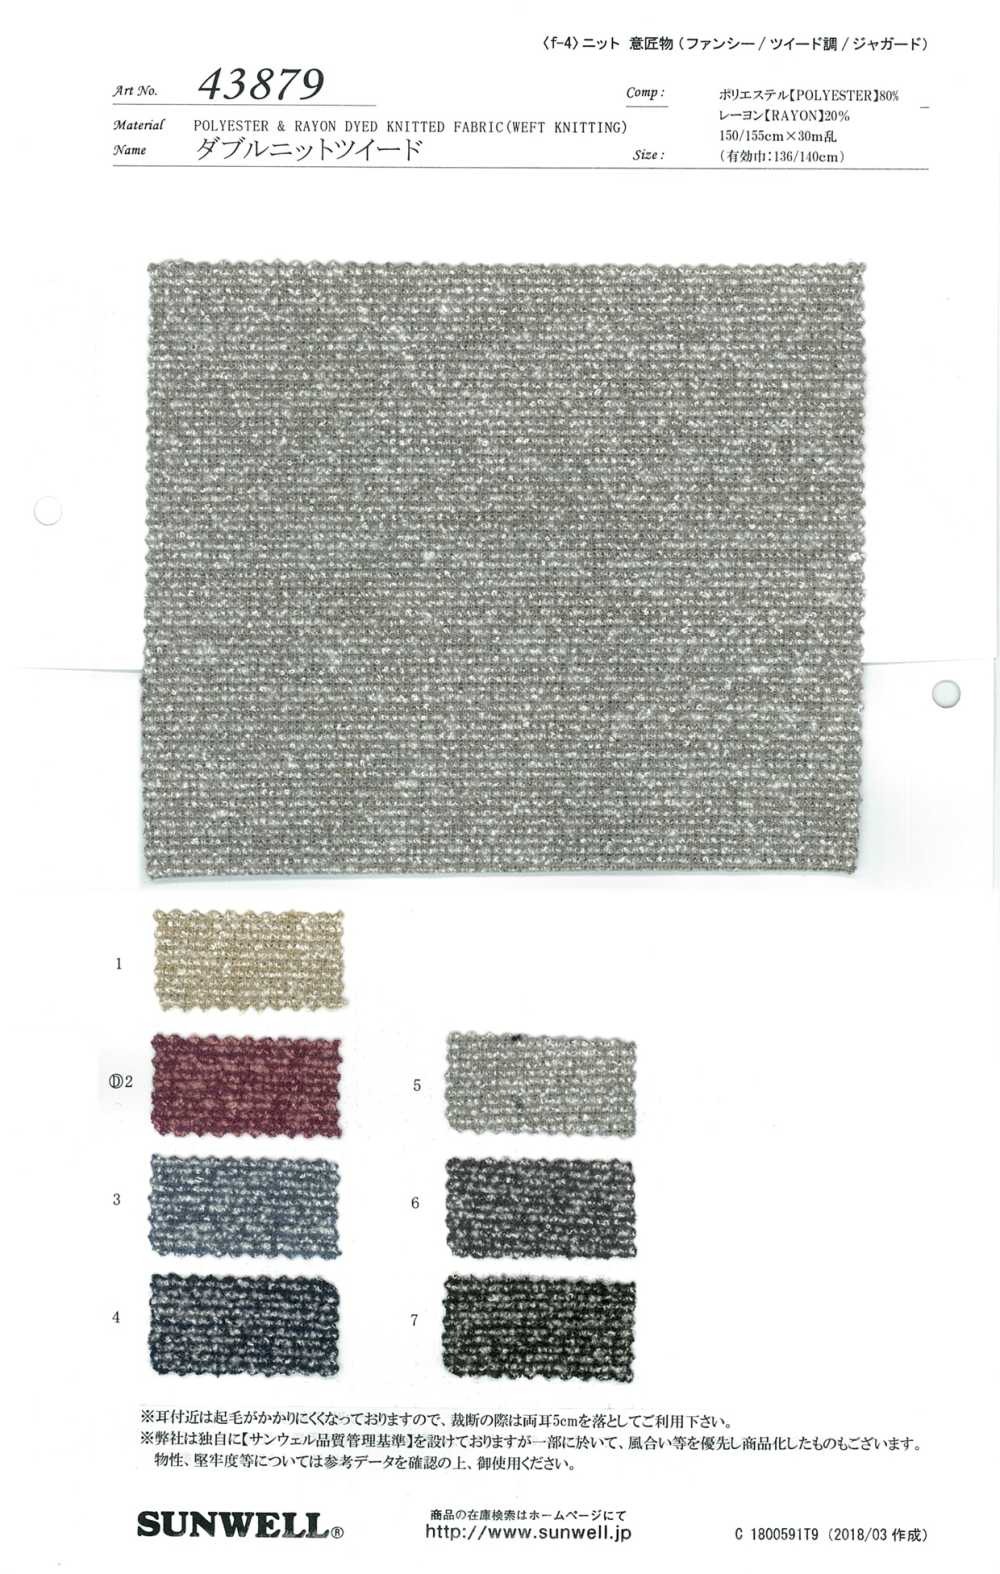 43879 [OUTLET] Double Knit Tweed[Textile / Fabric] SUNWELL